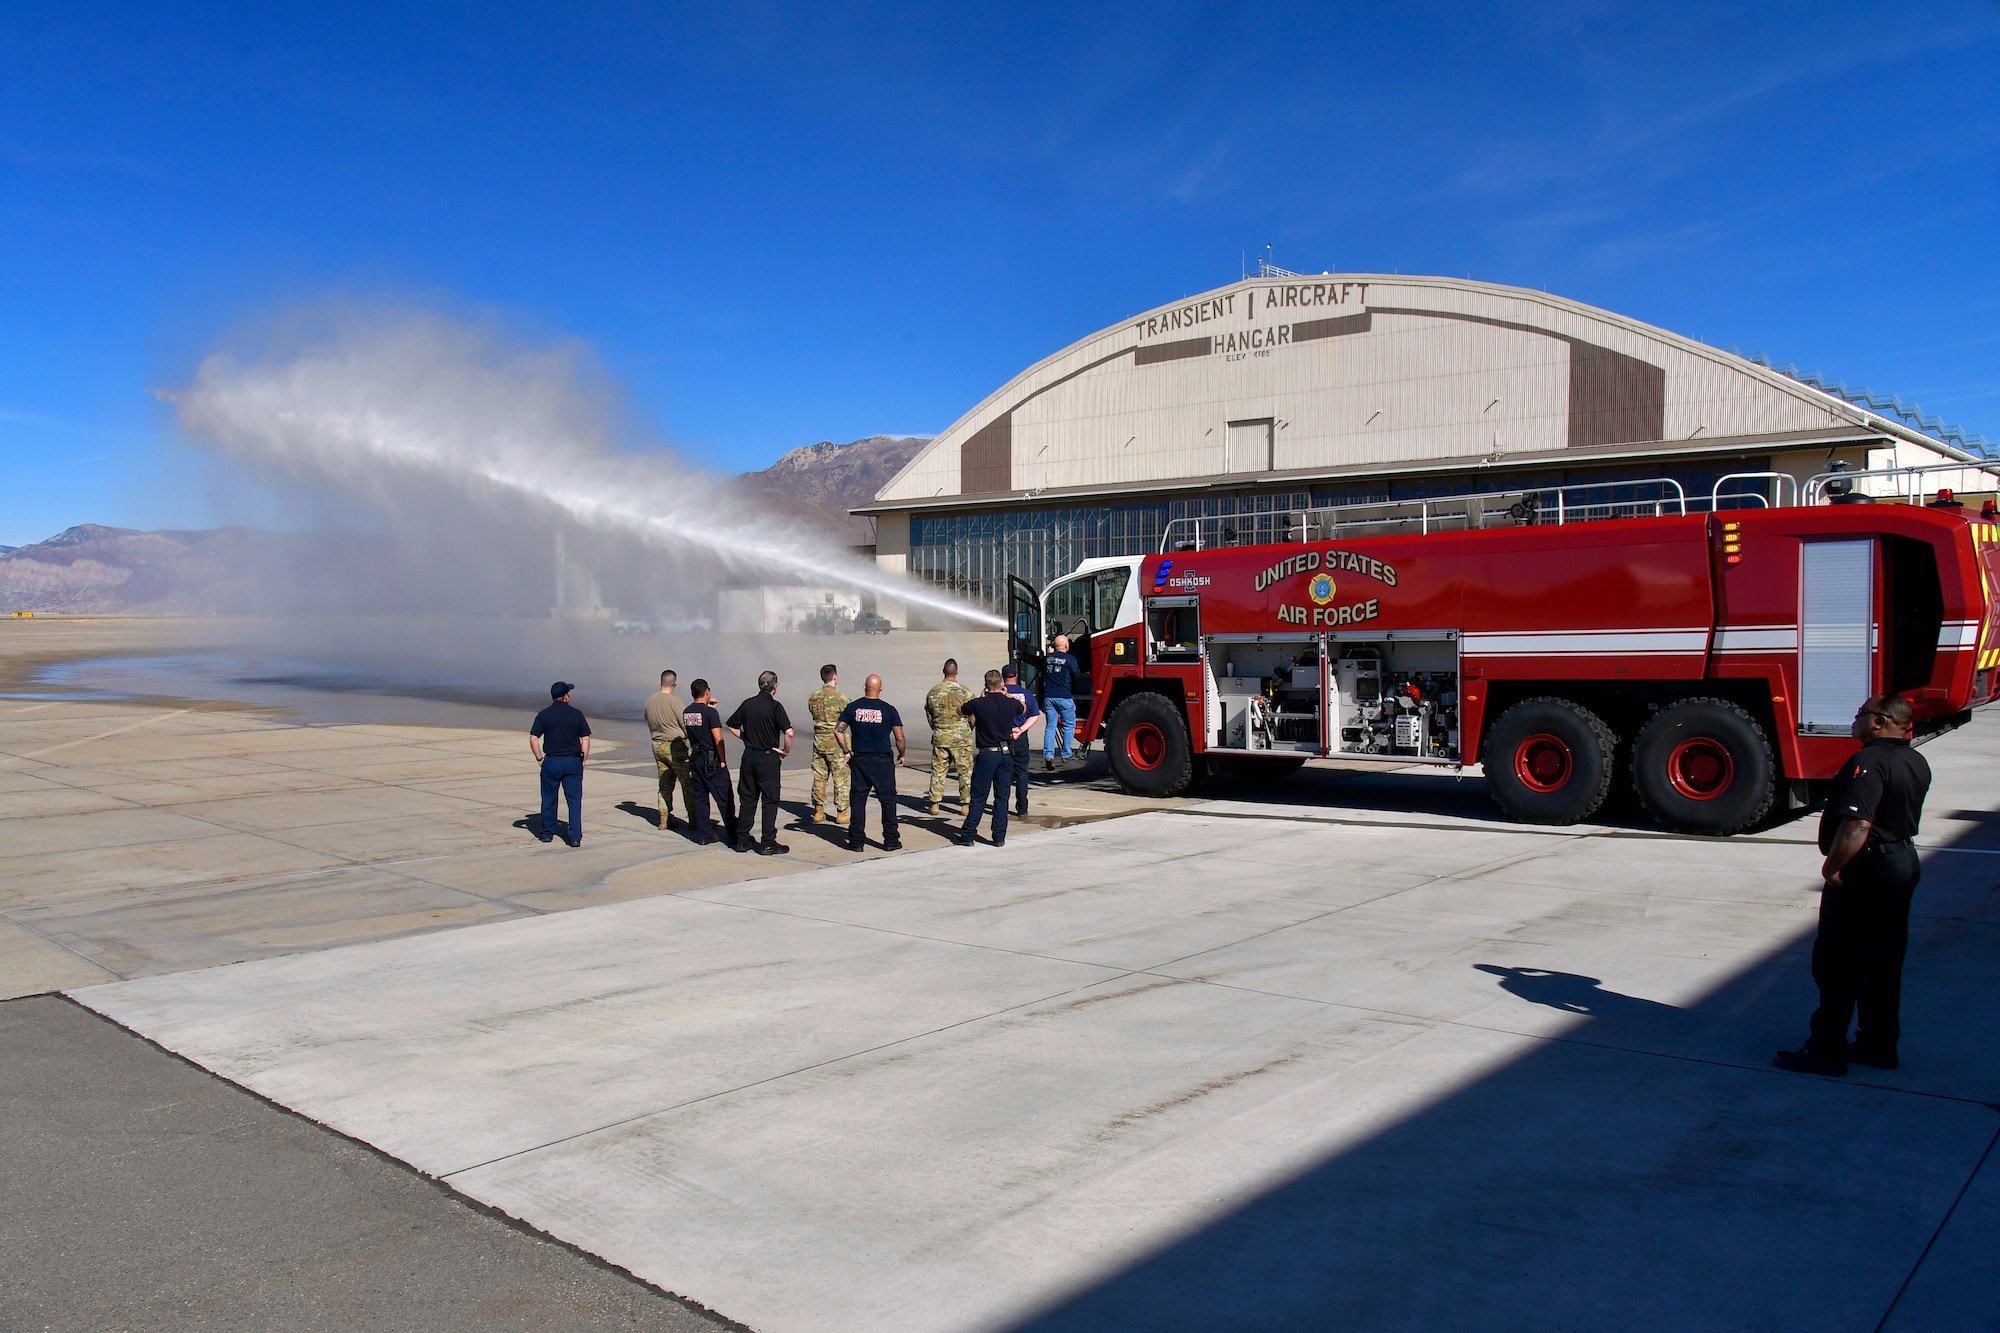 Firefighters watch as the water cannon attached to a newly delivered crash/fire response vehicle sprays water.